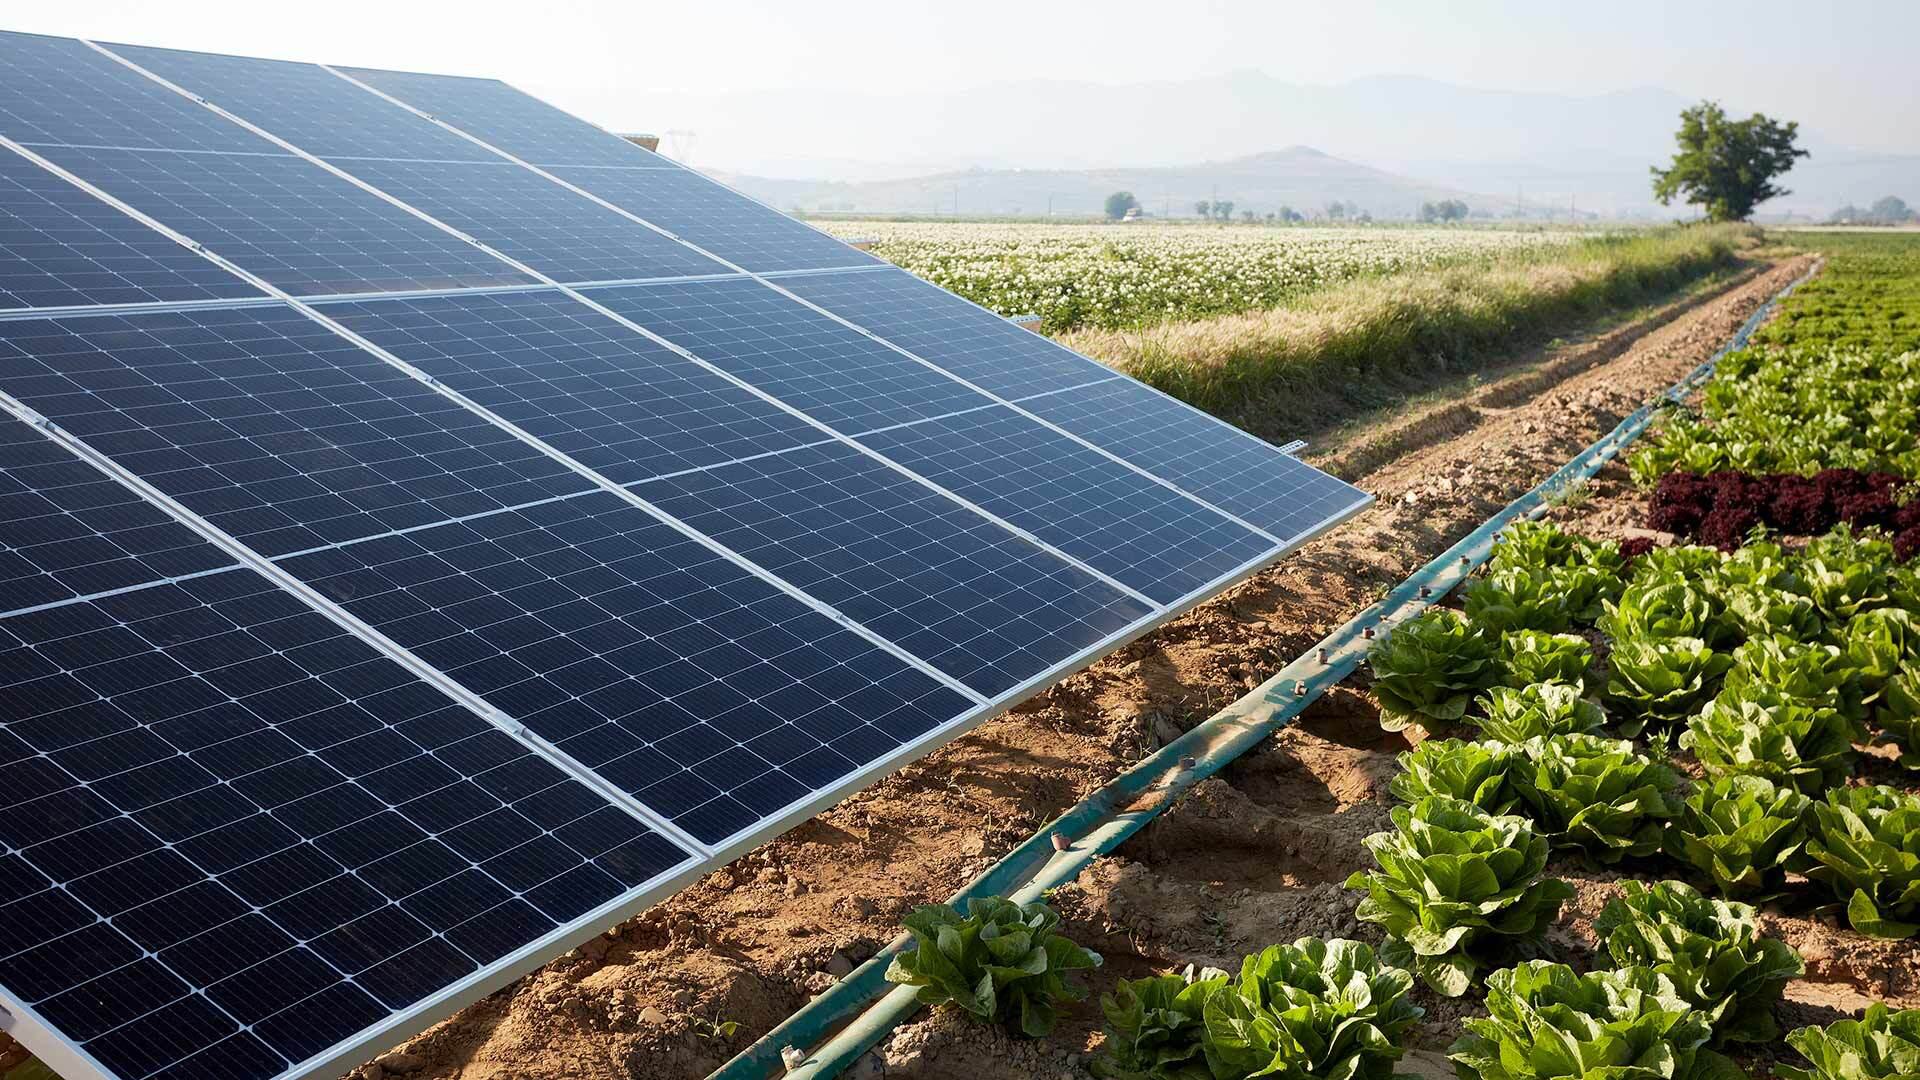 Solar panel among lettuces in a field